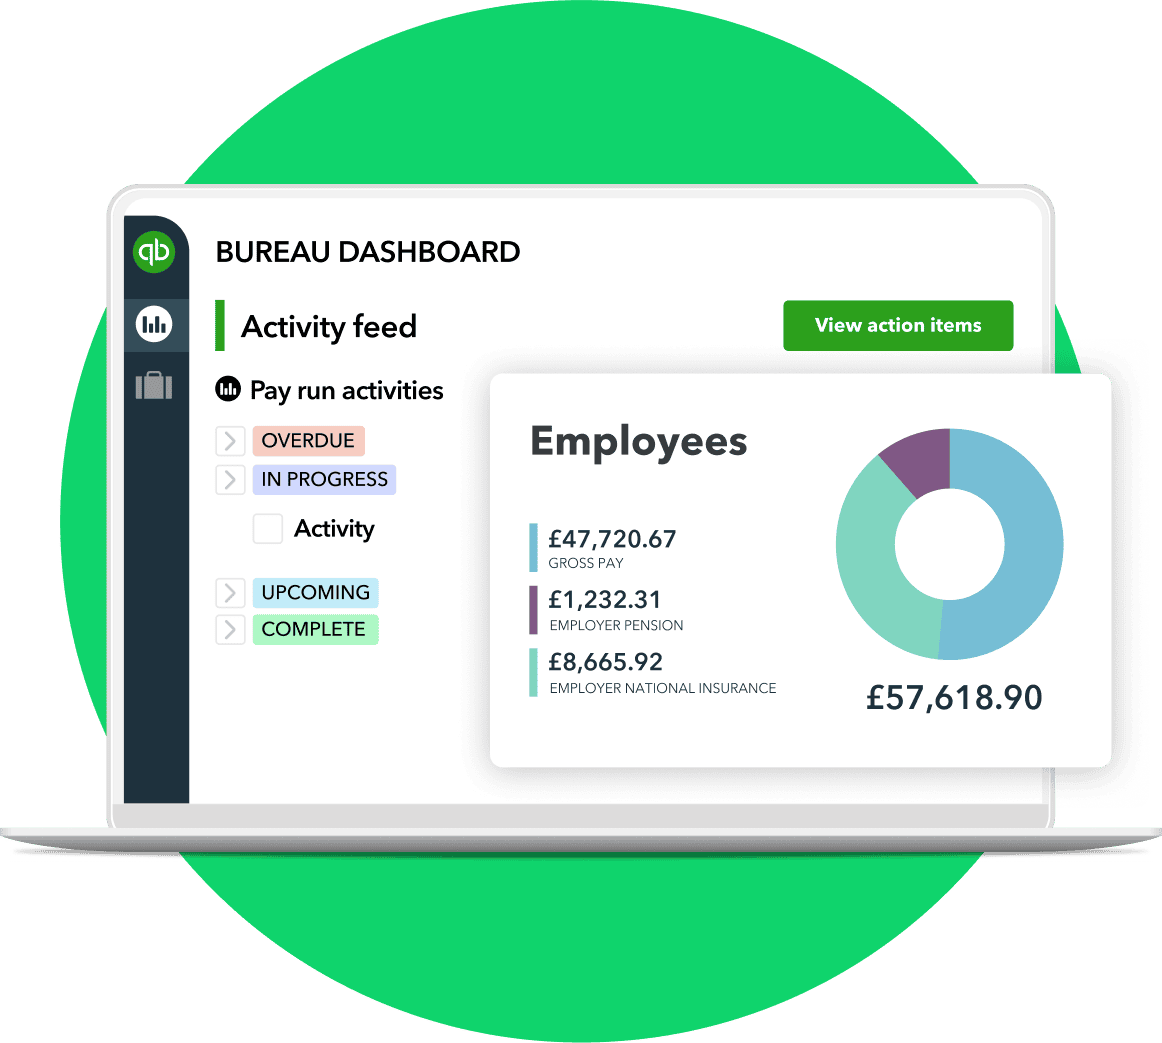 Accelerate your payroll processes with QuickBooks Bureau Payroll